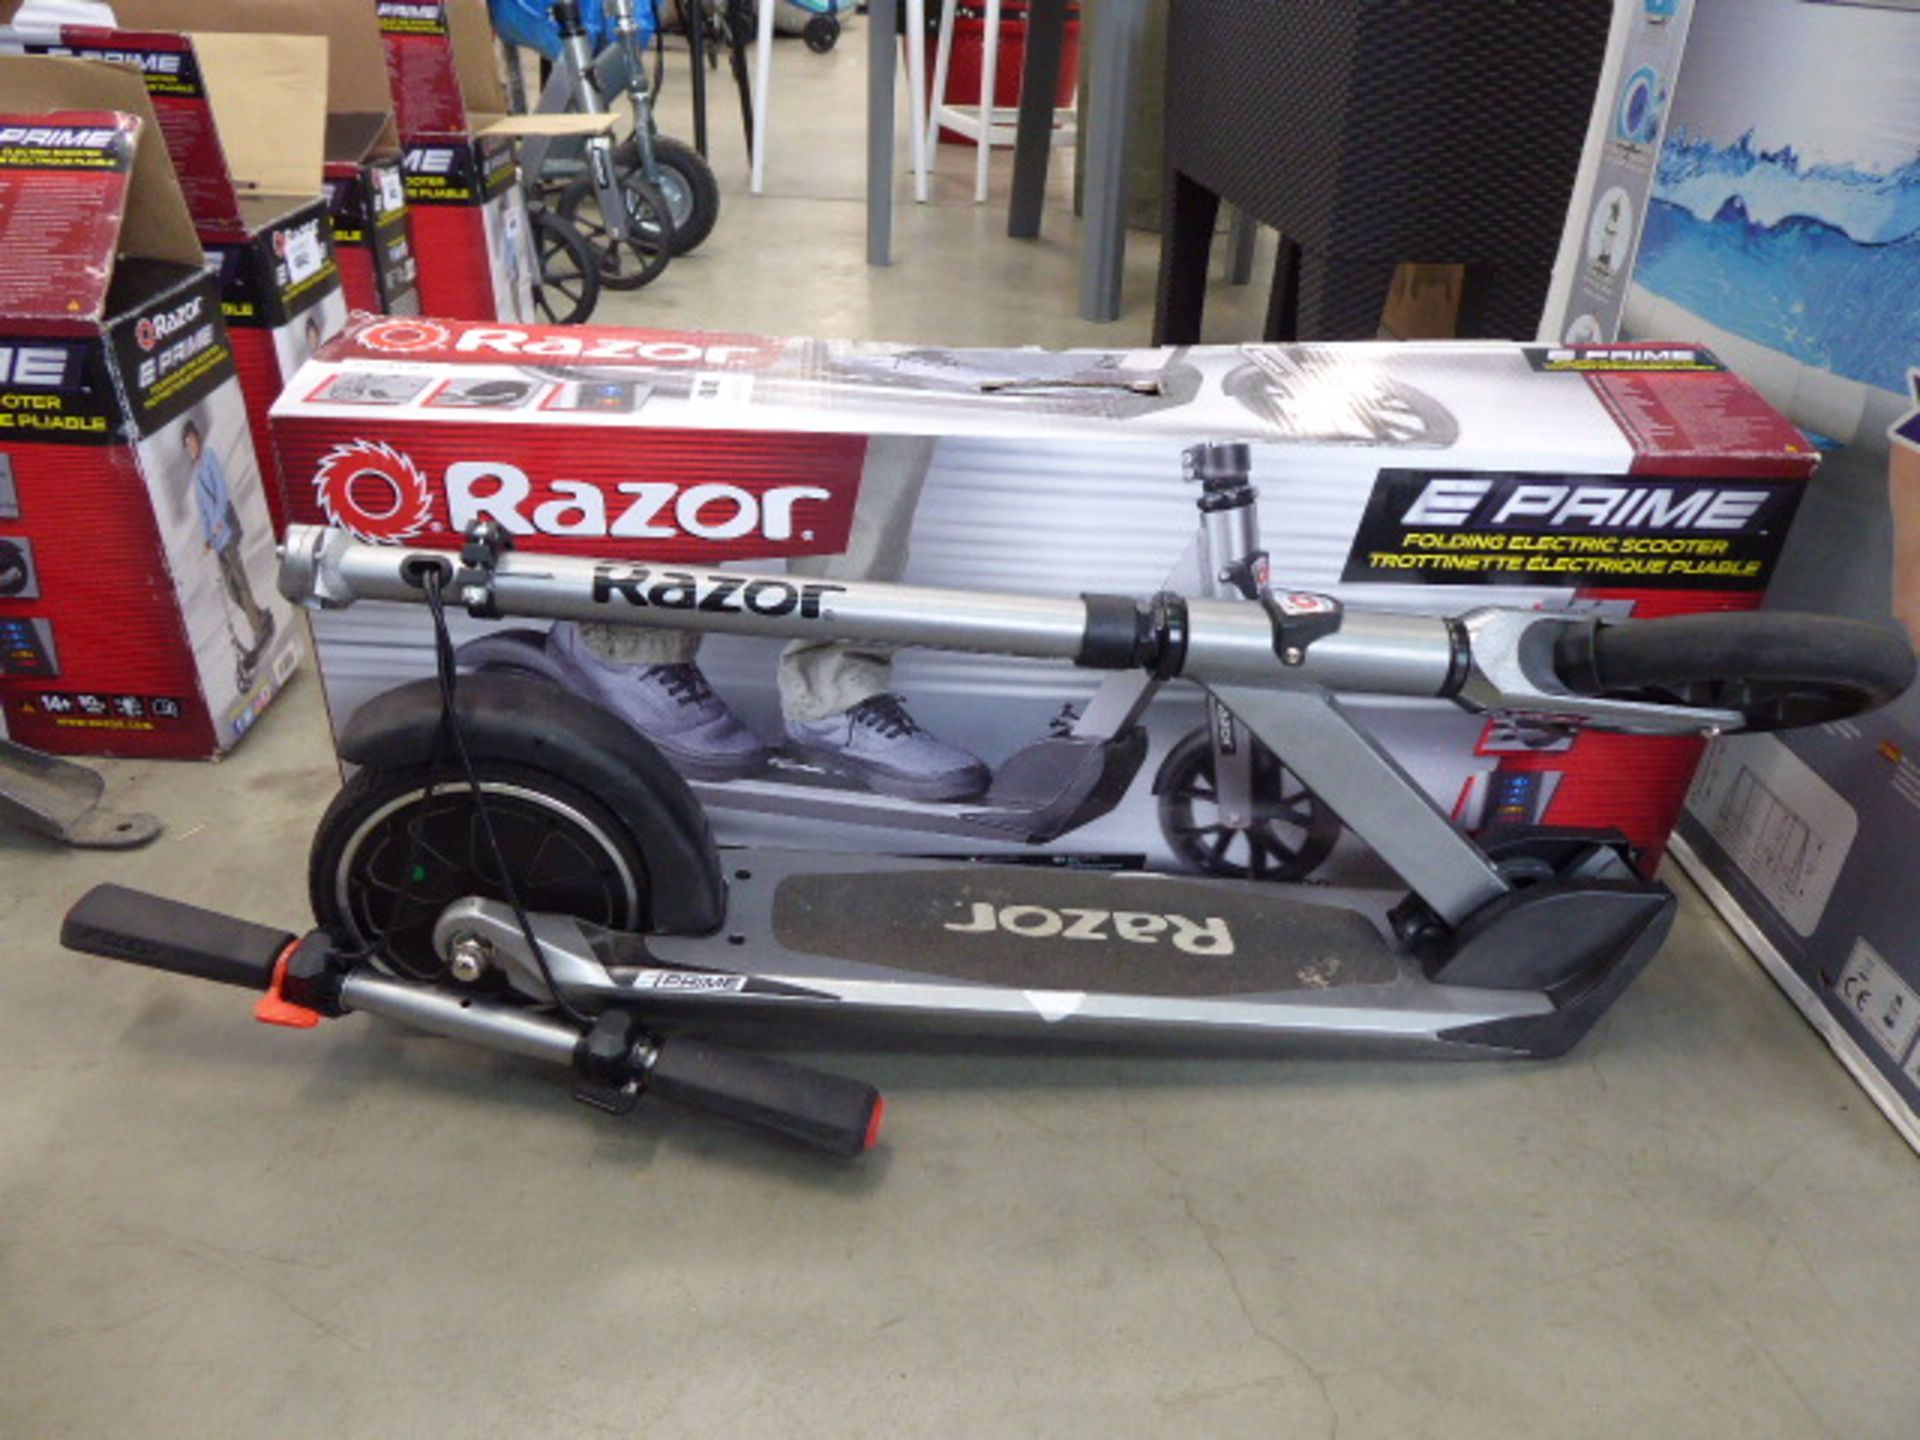 4047 Razor boxed electric scooter with charger - Image 2 of 2